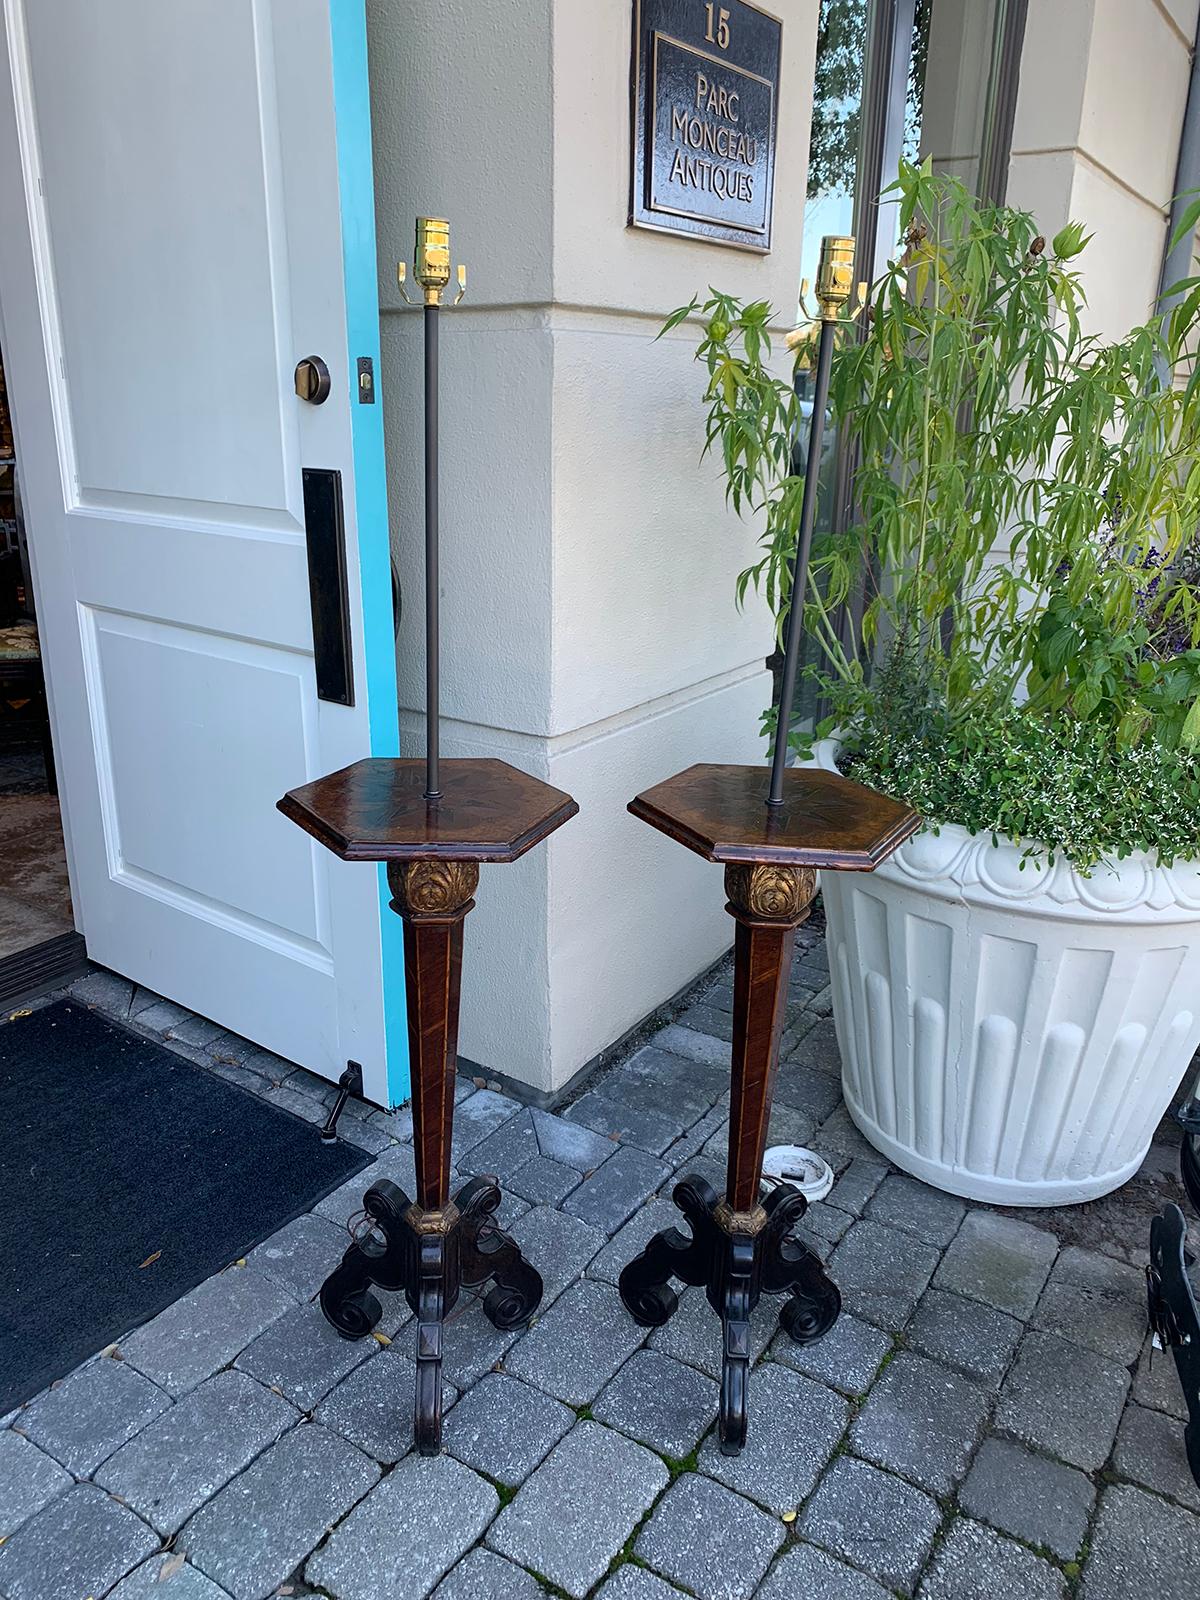 Pair of 18th-19th century inlaid continental pedestals as floor lamps
Brand new wiring.
Measures: 12.5